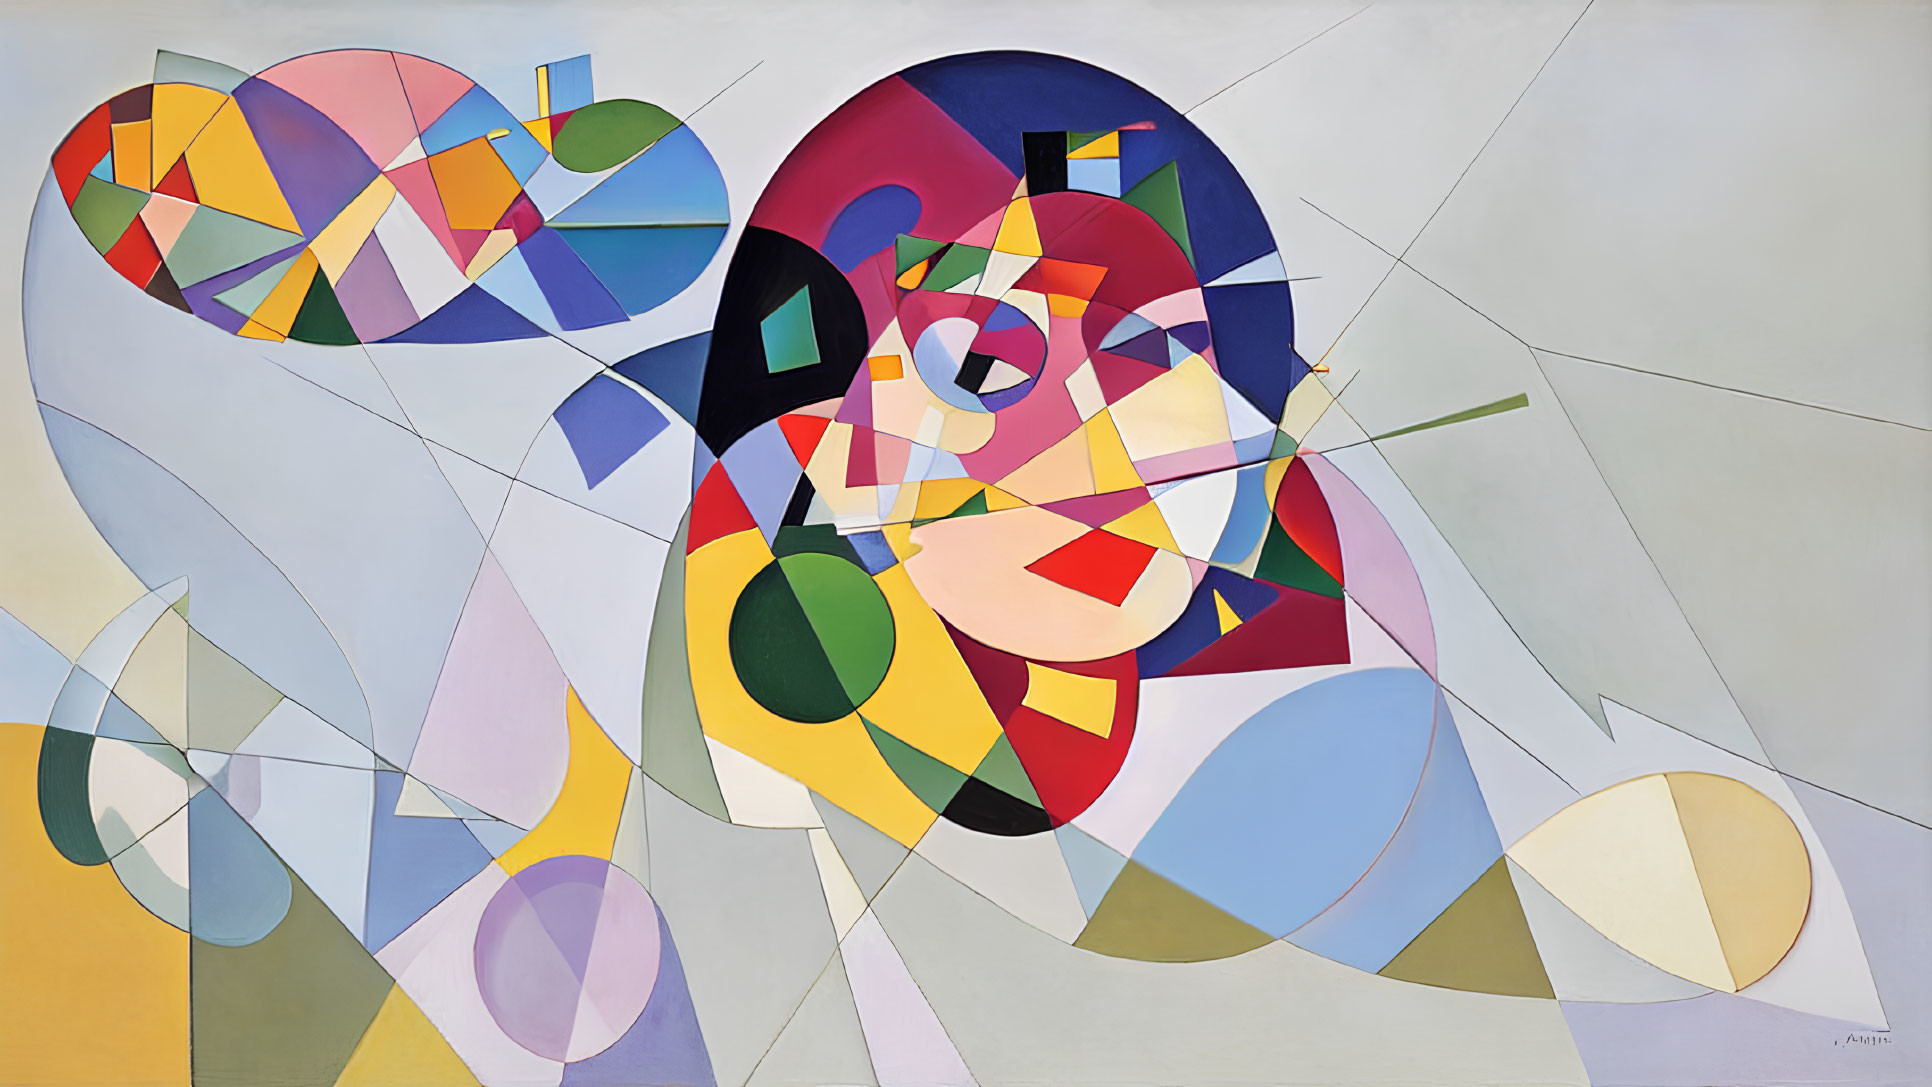 Vivid Abstract Geometric Painting with Interlocking Shapes and Fragmented Face